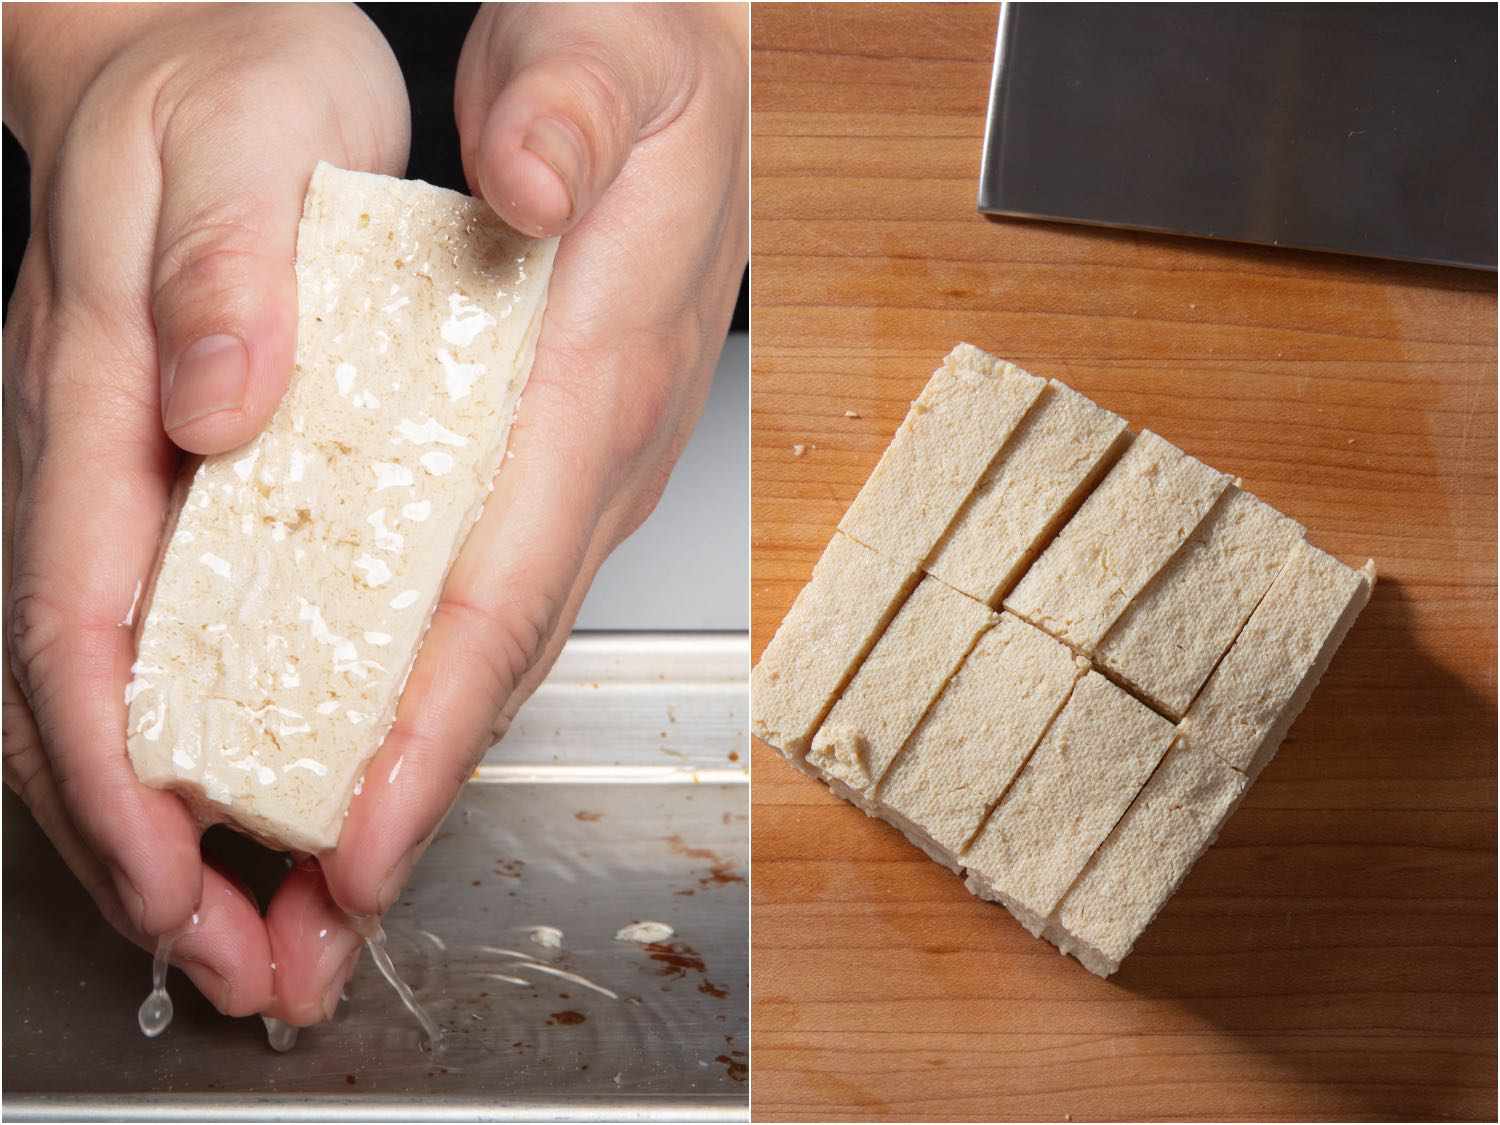 Side by side photographs showing squeezing of thawed frozen tofu and same block of tofu cut into equal size pieces